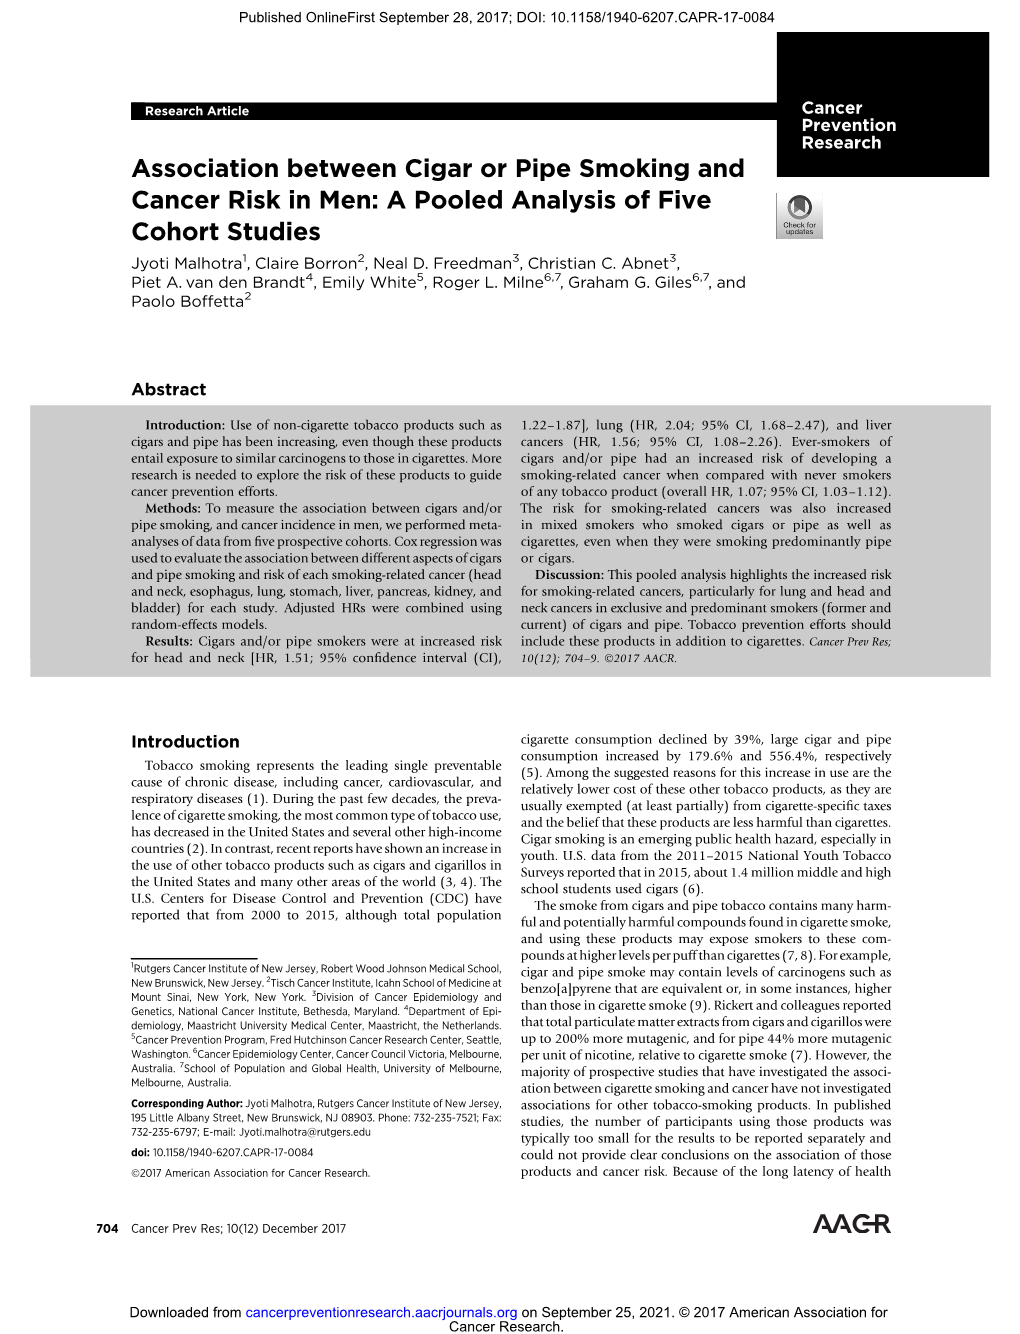 Association Between Cigar Or Pipe Smoking and Cancer Risk in Men: a Pooled Analysis of Five Cohort Studies Jyoti Malhotra1, Claire Borron2, Neal D